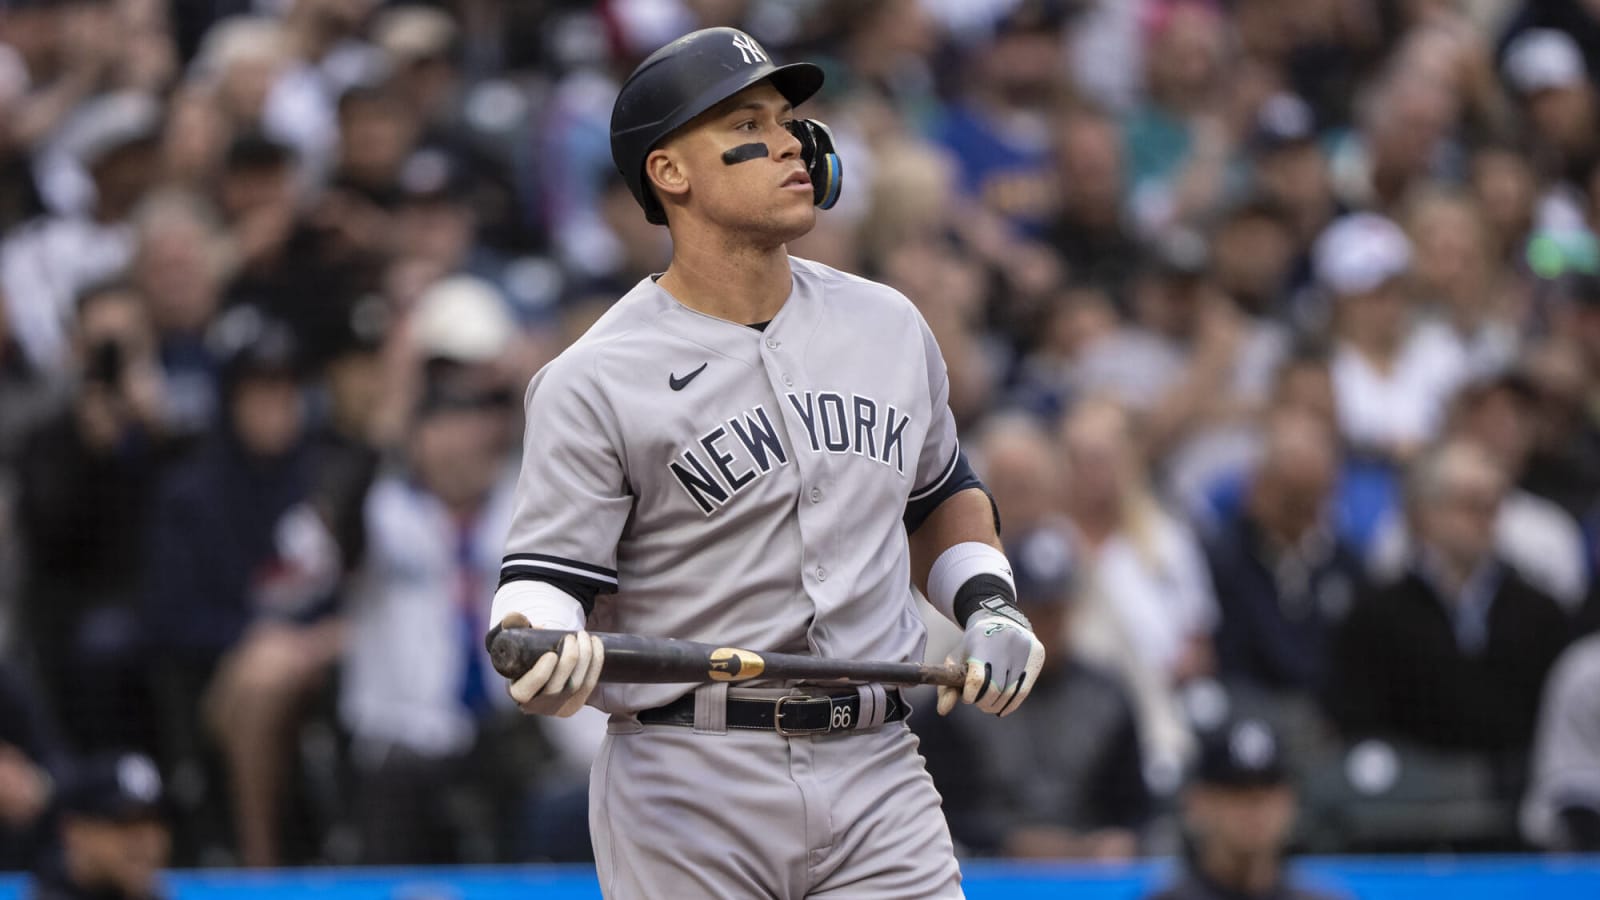 Aaron Judge sets the record straight on his injury